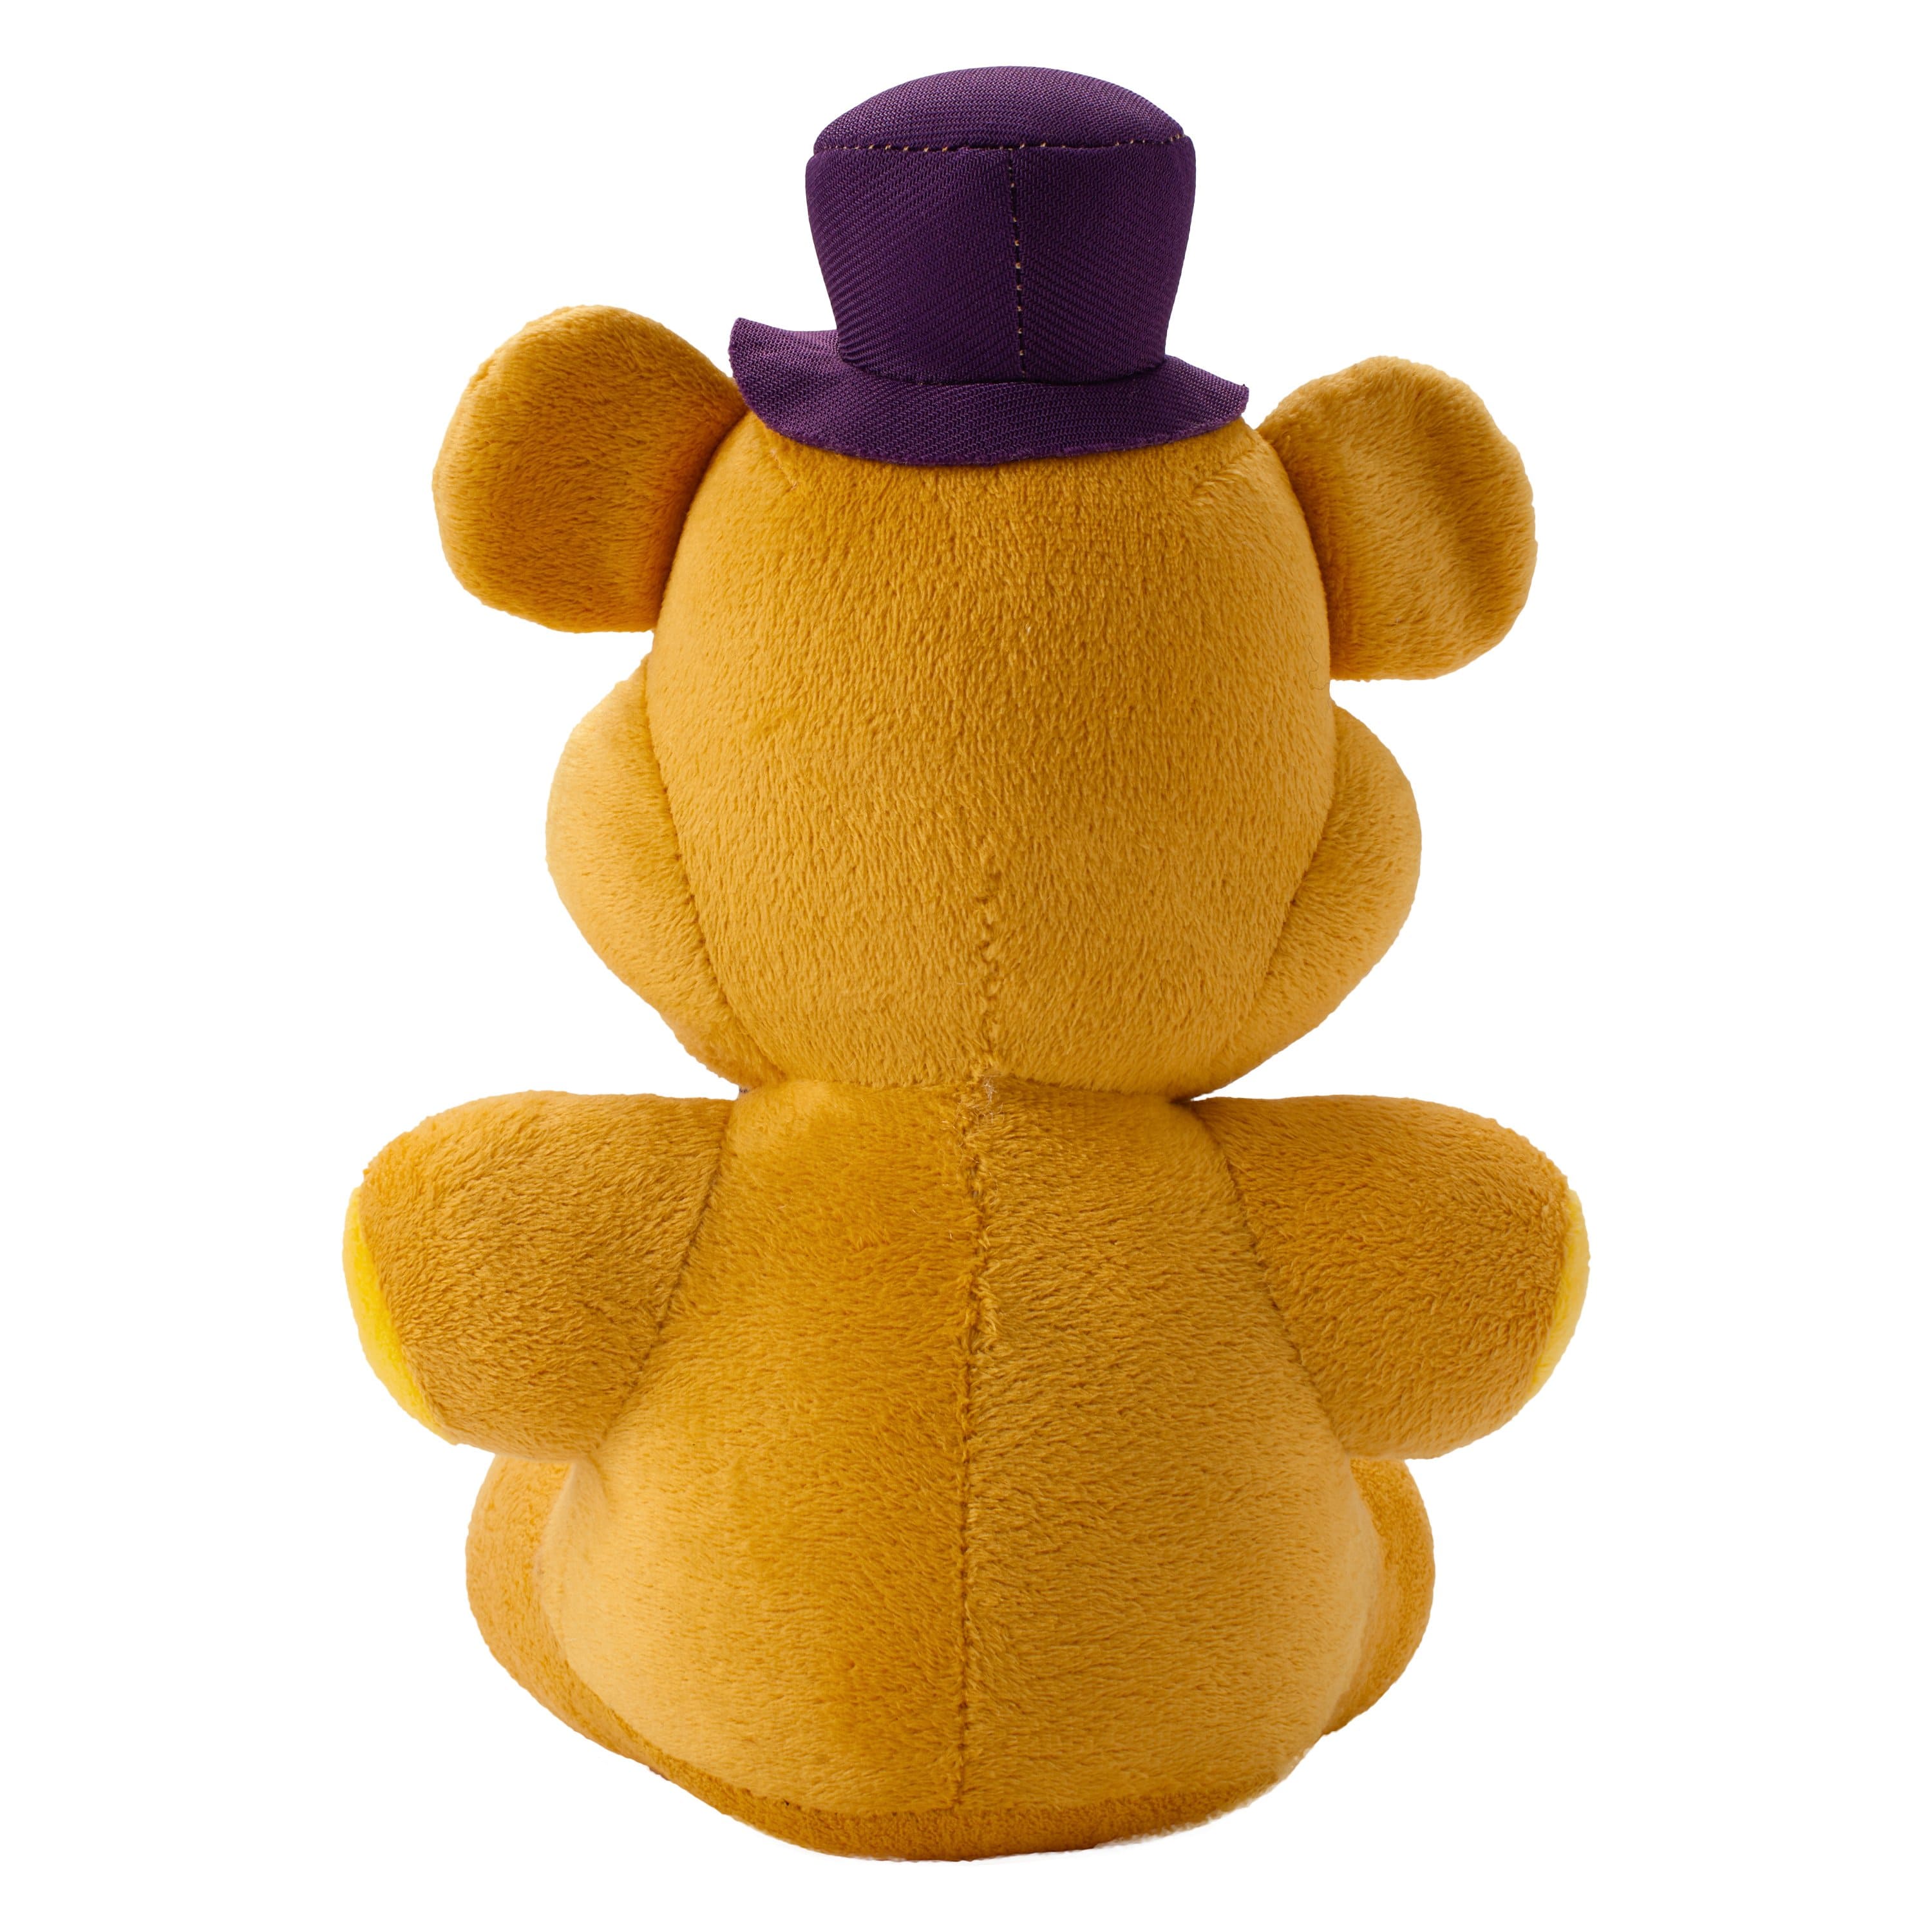 Five Nights at Freddy's - Limited Edition Possessed Fredbear Plush